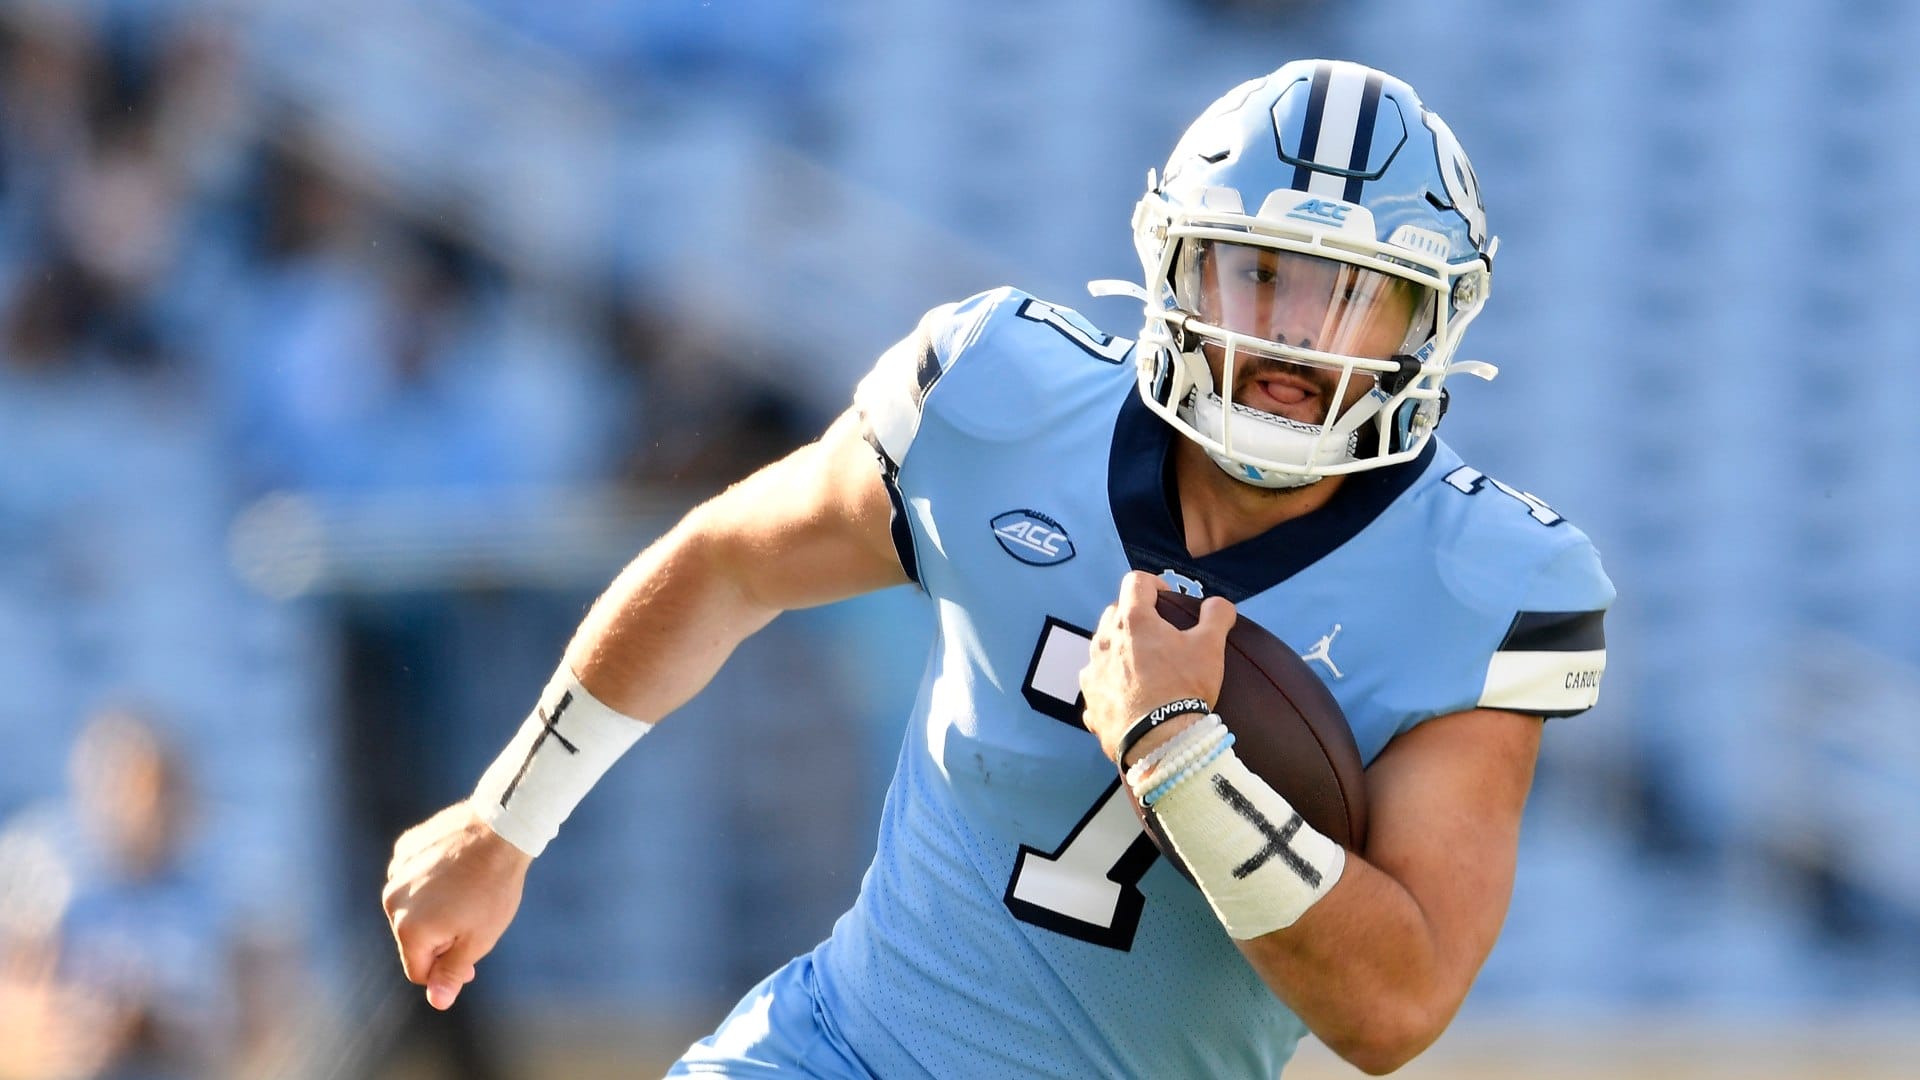 CHAPEL HILL, NORTH CAROLINA - NOVEMBER 14: Sam Howell #7 of the North Carolina Tar Heels scrambles against the Wake Forest Demon Deacons during their game at Kenan Stadium on November 14, 2020 in Chapel Hill, North Carolina. The Tar Heels won 59-53. (Photo by Grant Halverson/Getty Images)